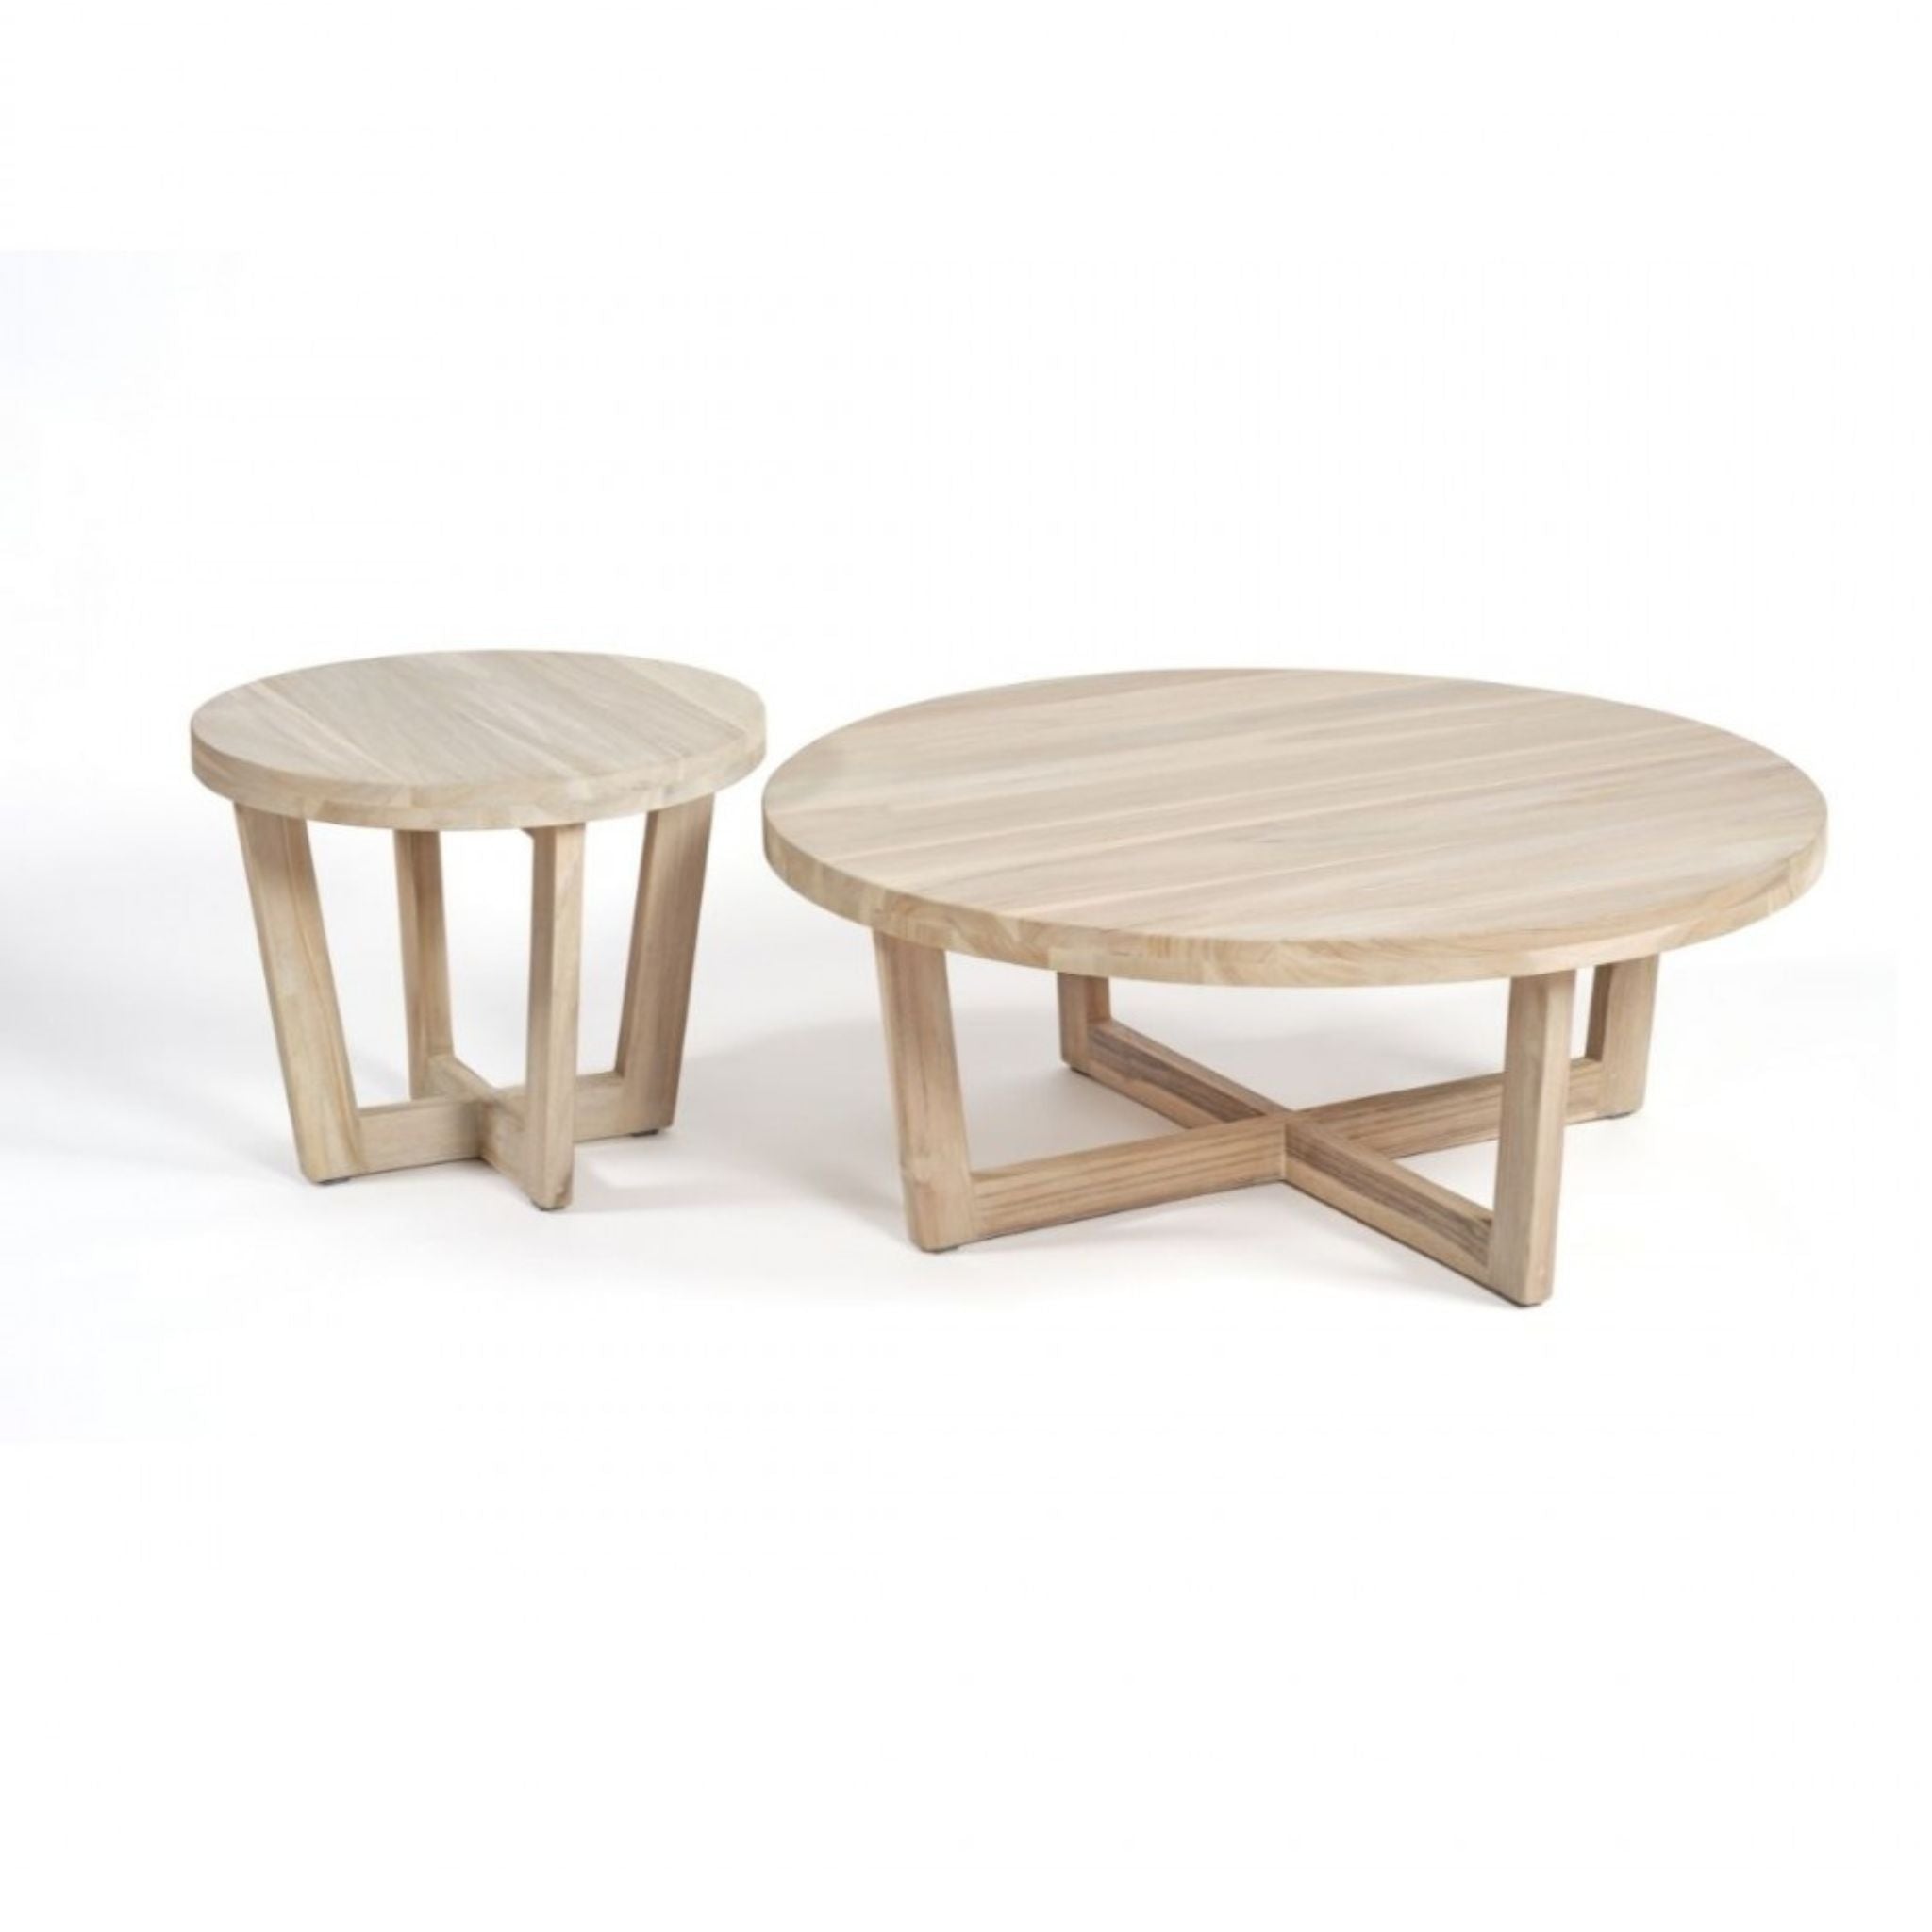 Crisal Decoracion Kai-S Round Side Table With Teak Wood Leg and Top - ModernistaLiving